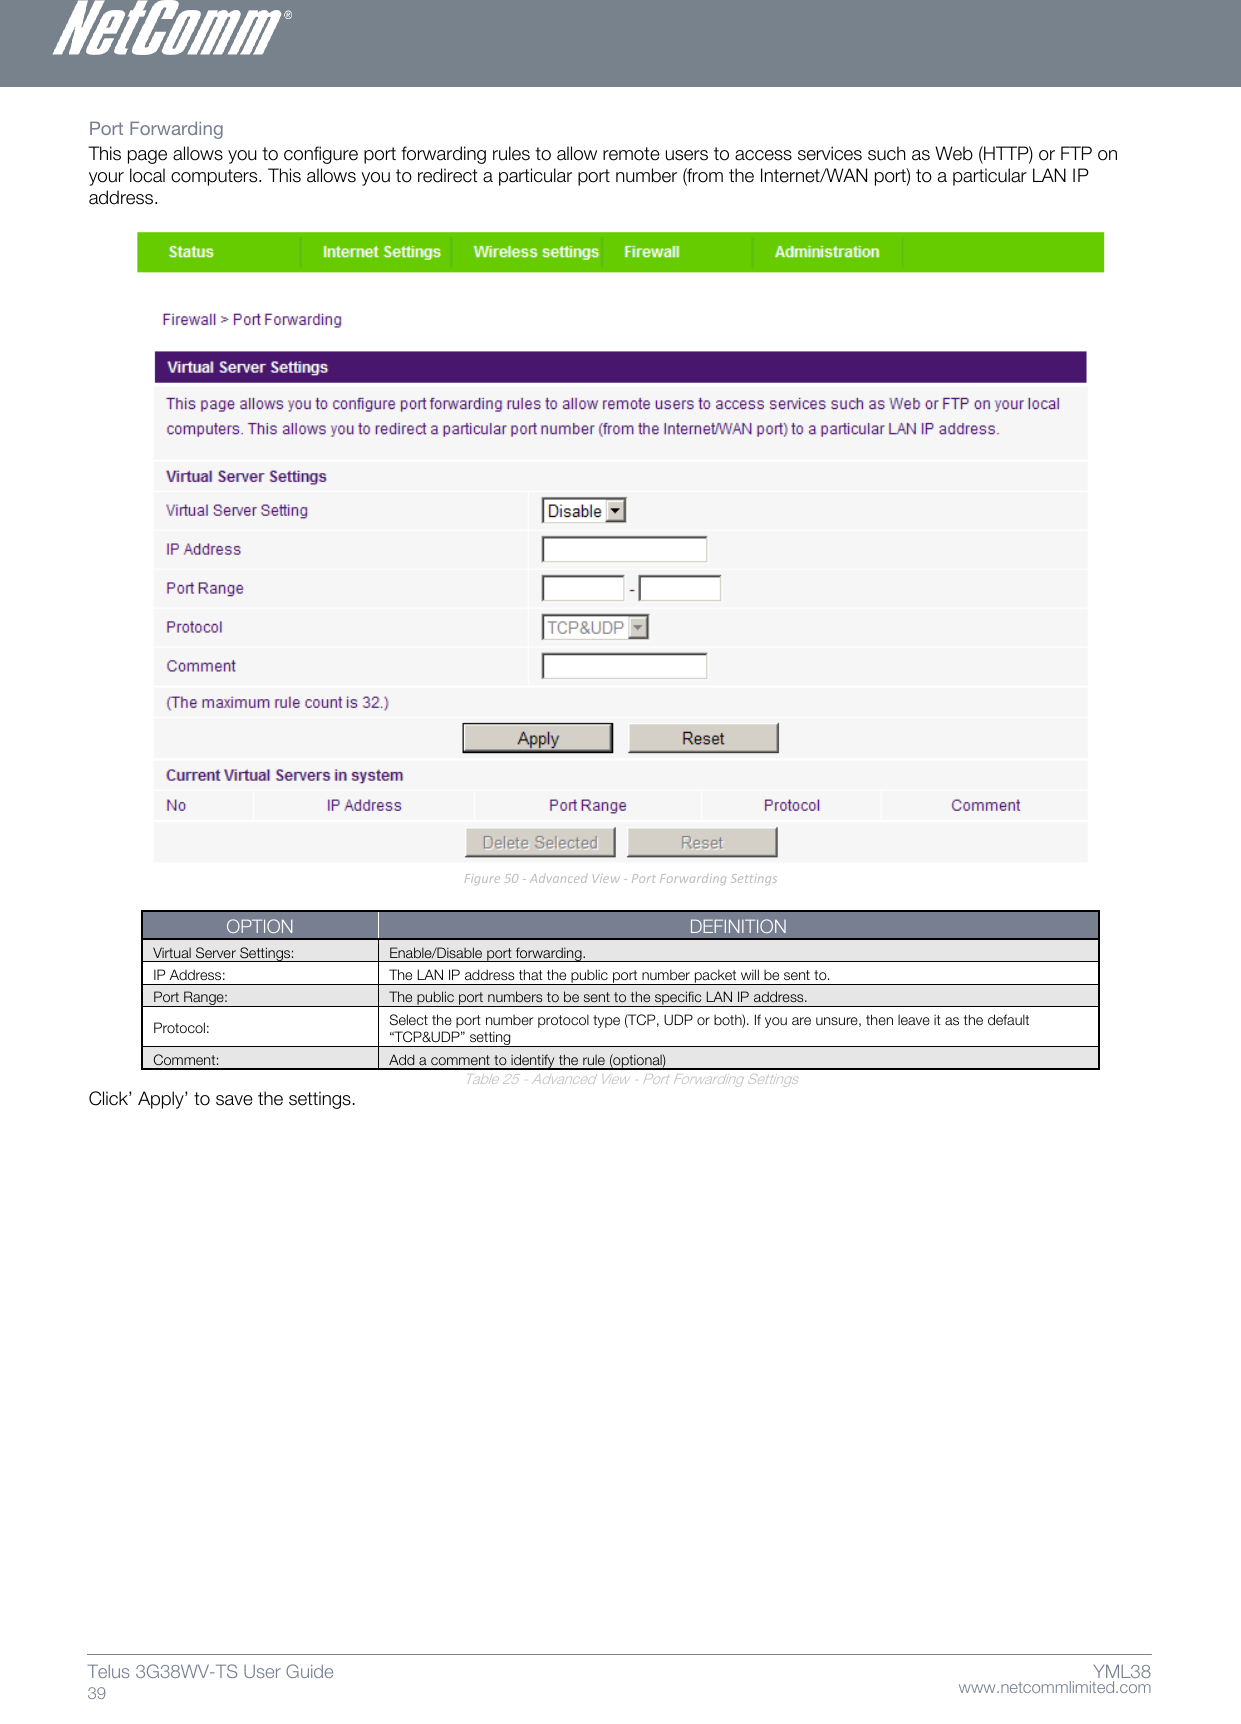    www.netcommlimited.com Telus 3G38WV-TS User Guide  39 YML38 Port Forwarding  This page allows you to configure port forwarding rules to allow remote users to access services such as Web (HTTP) or FTP on your local computers. This allows you to redirect a particular port number (from the Internet/WAN port) to a particular LAN IP address.   Figure 50 - Advanced View - Port Forwarding Settings  OPTION DEFINITION Virtual Server Settings:  Enable/Disable port forwarding.  IP Address:  The LAN IP address that the public port number packet will be sent to.  Port Range:  The public port numbers to be sent to the specific LAN IP address.  Protocol:  Select the port number protocol type (TCP, UDP or both). If you are unsure, then leave it as the default ‚TCP&amp;UDP‛ setting  Comment:  Add a comment to identify the rule (optional)  Table 25 - Advanced View - Port Forwarding Settings Click’ Apply’ to save the settings.    